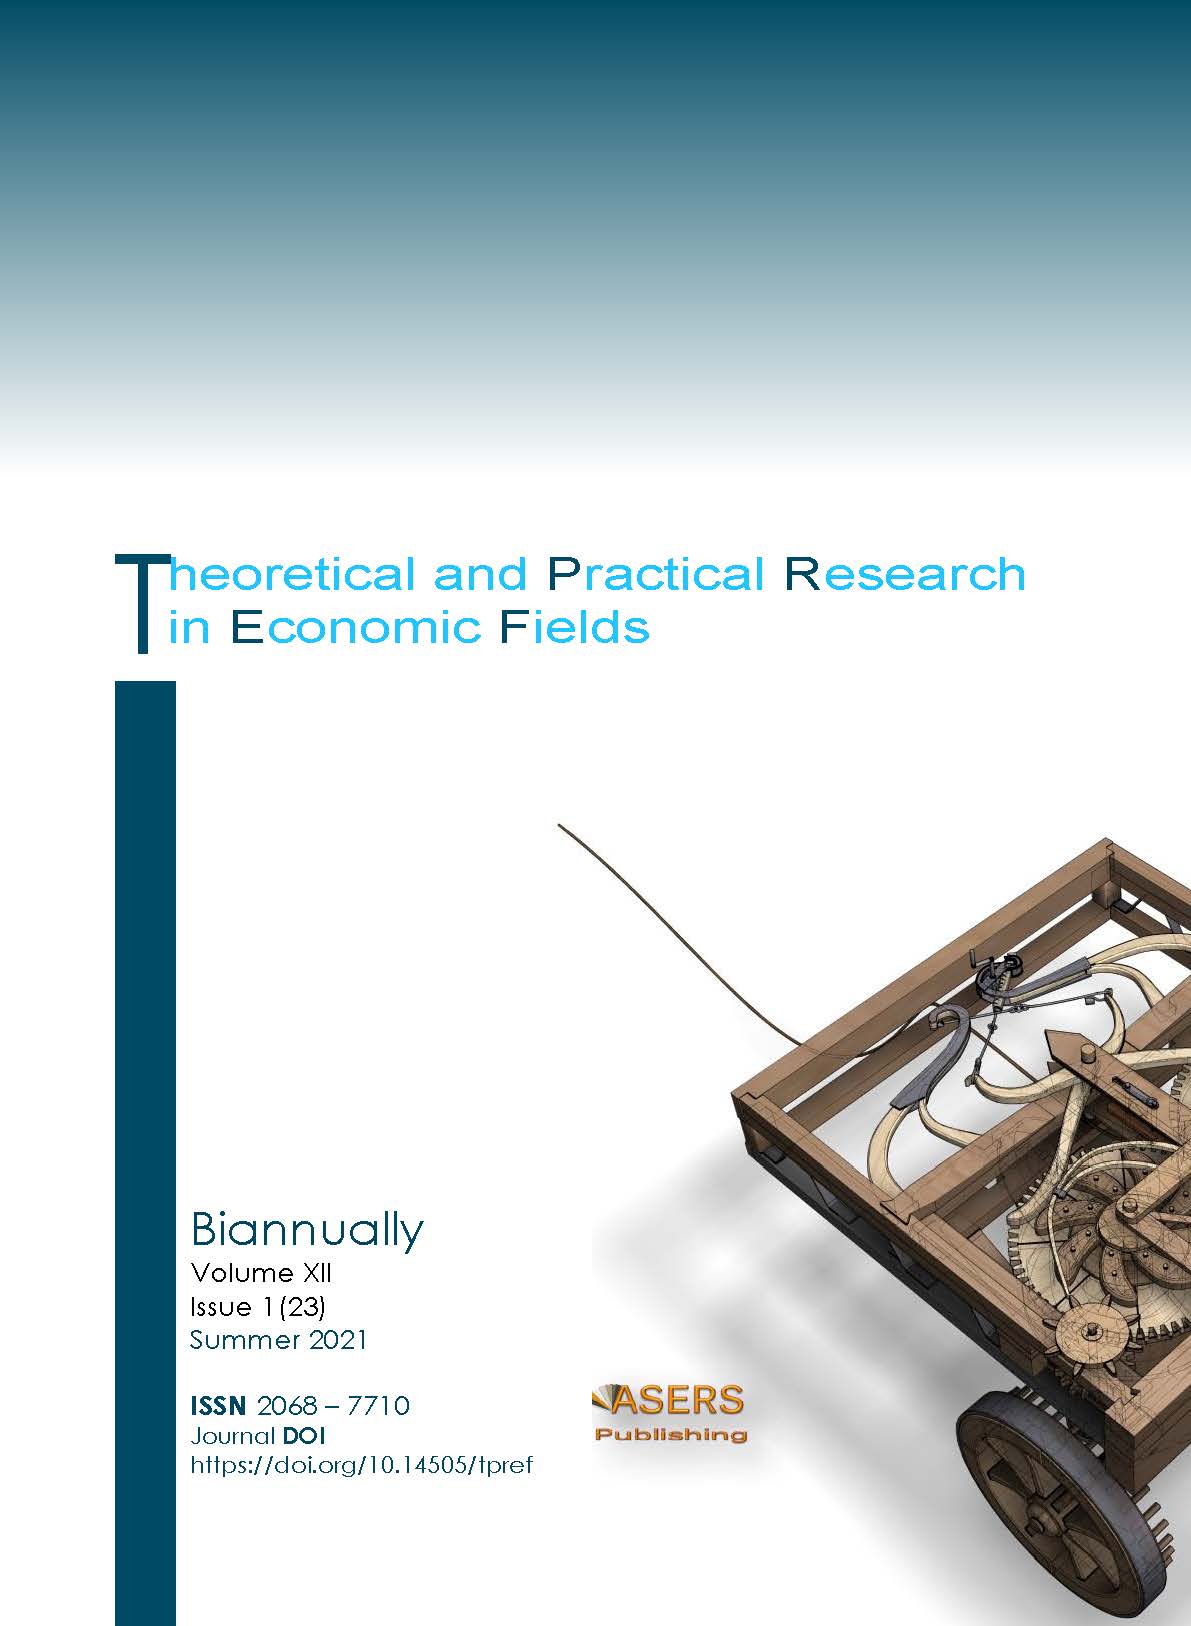 COVID-19: BEHAVIOR OF PUBLIC FINANCES TOOLS IN DEMOCRATIC REPUBLIC OF CONGO. ECONOMIC SITUATION AND PERSPECTIVES Cover Image